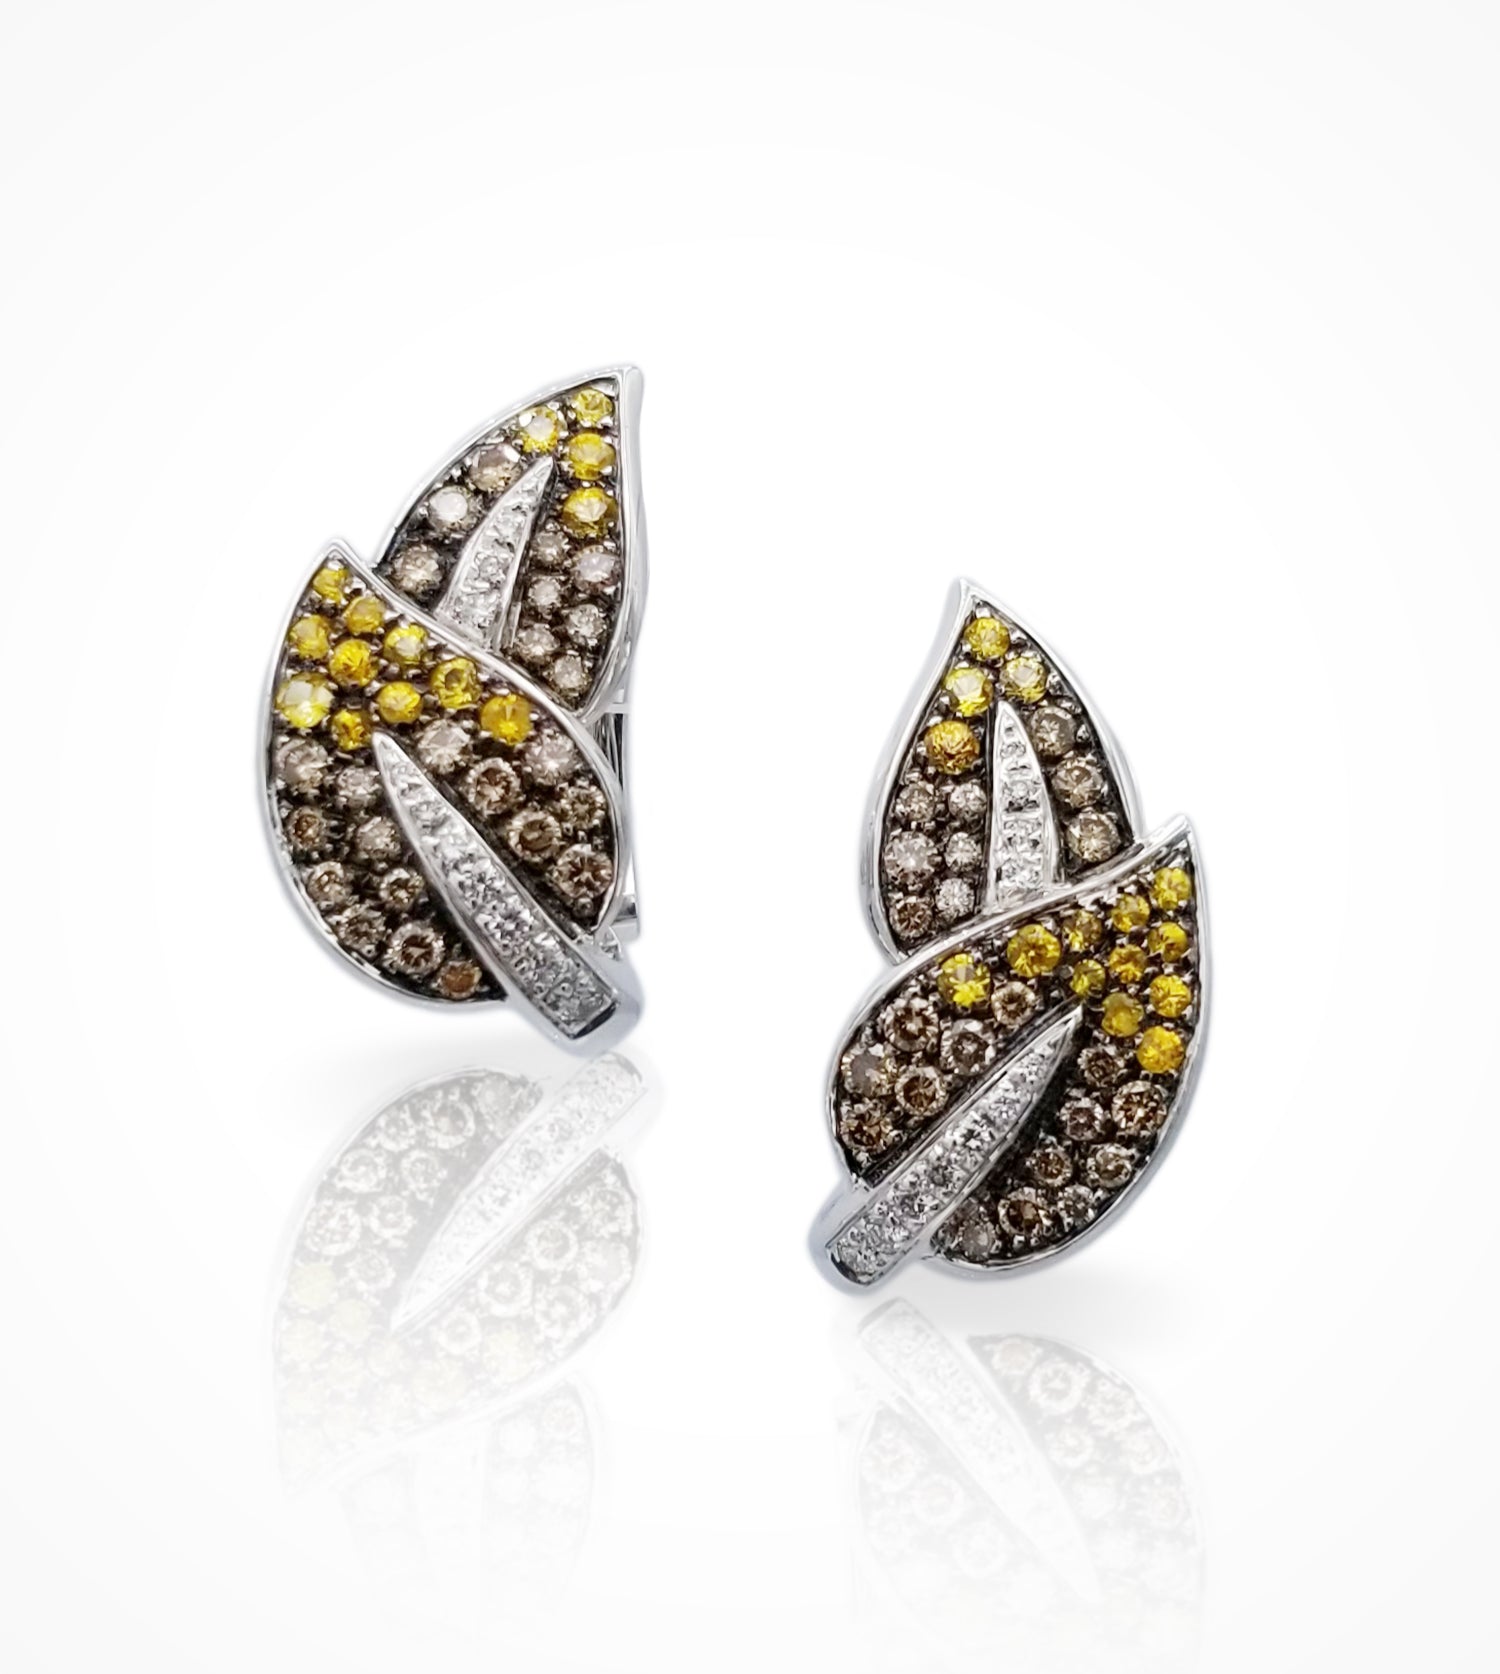 EB-003907-18K white gold leaf motif pave earrings with white and brown diamonds=1.36cts, yellow sapphires=0.87cts